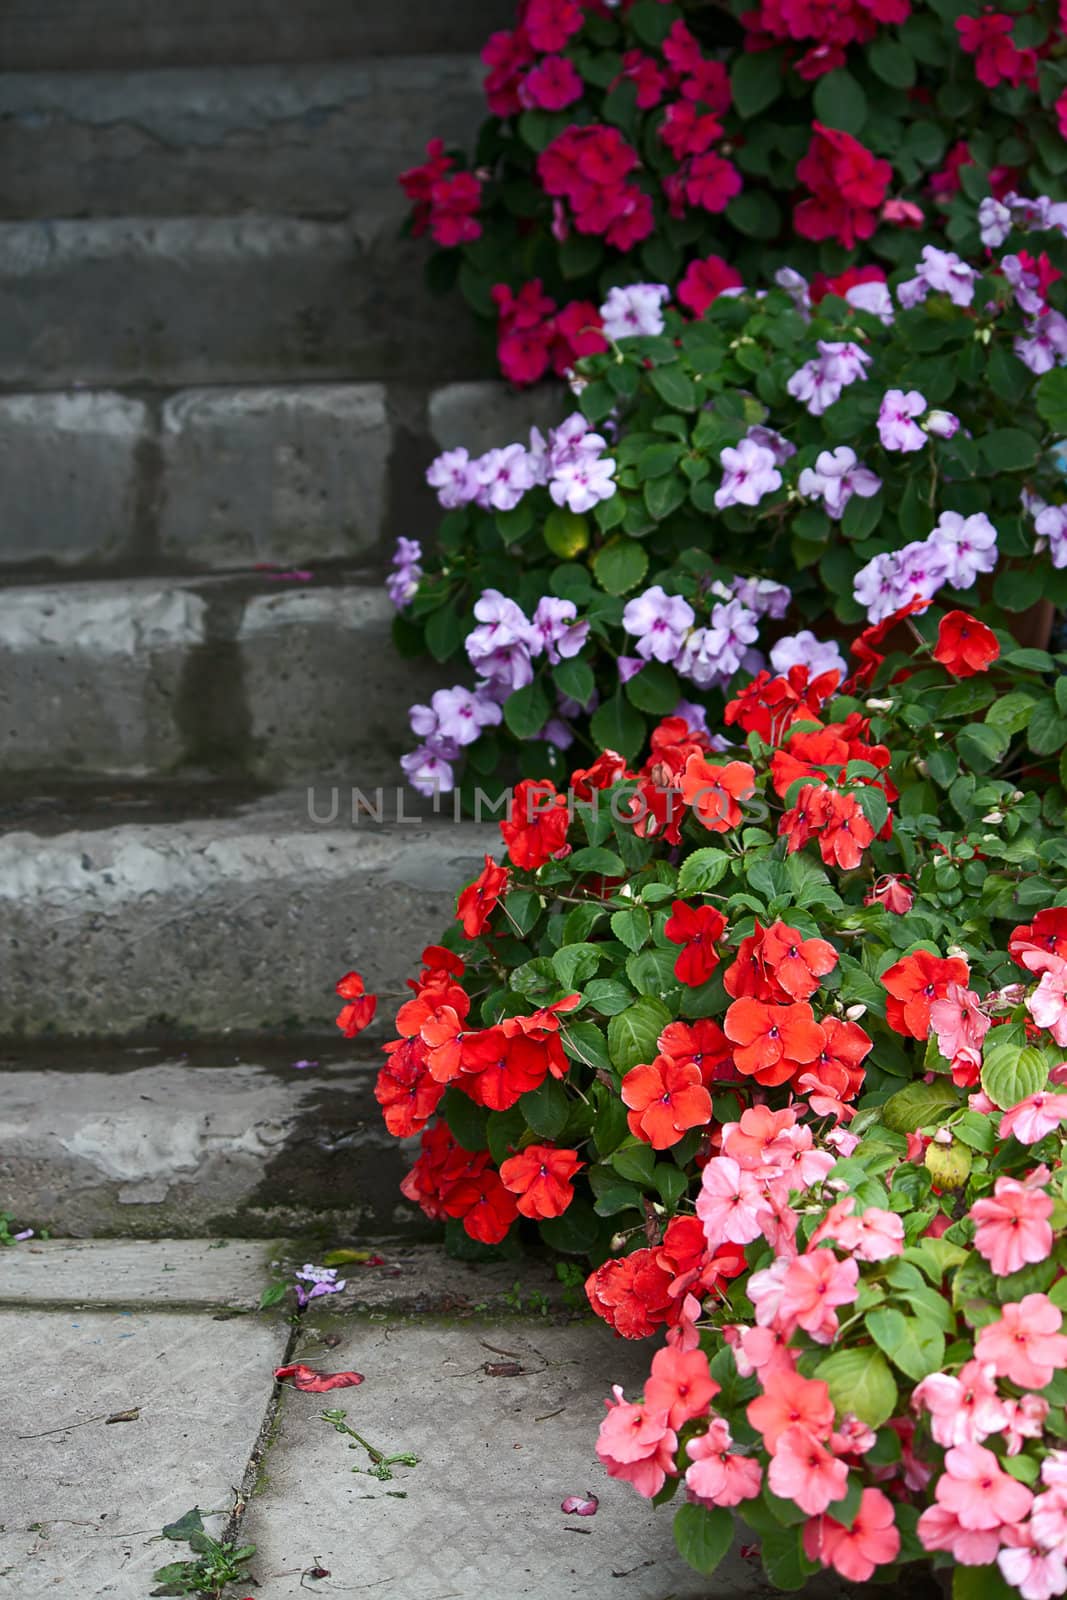 Flowers of different colors on  steps of  house.Image with shallow depth of field.